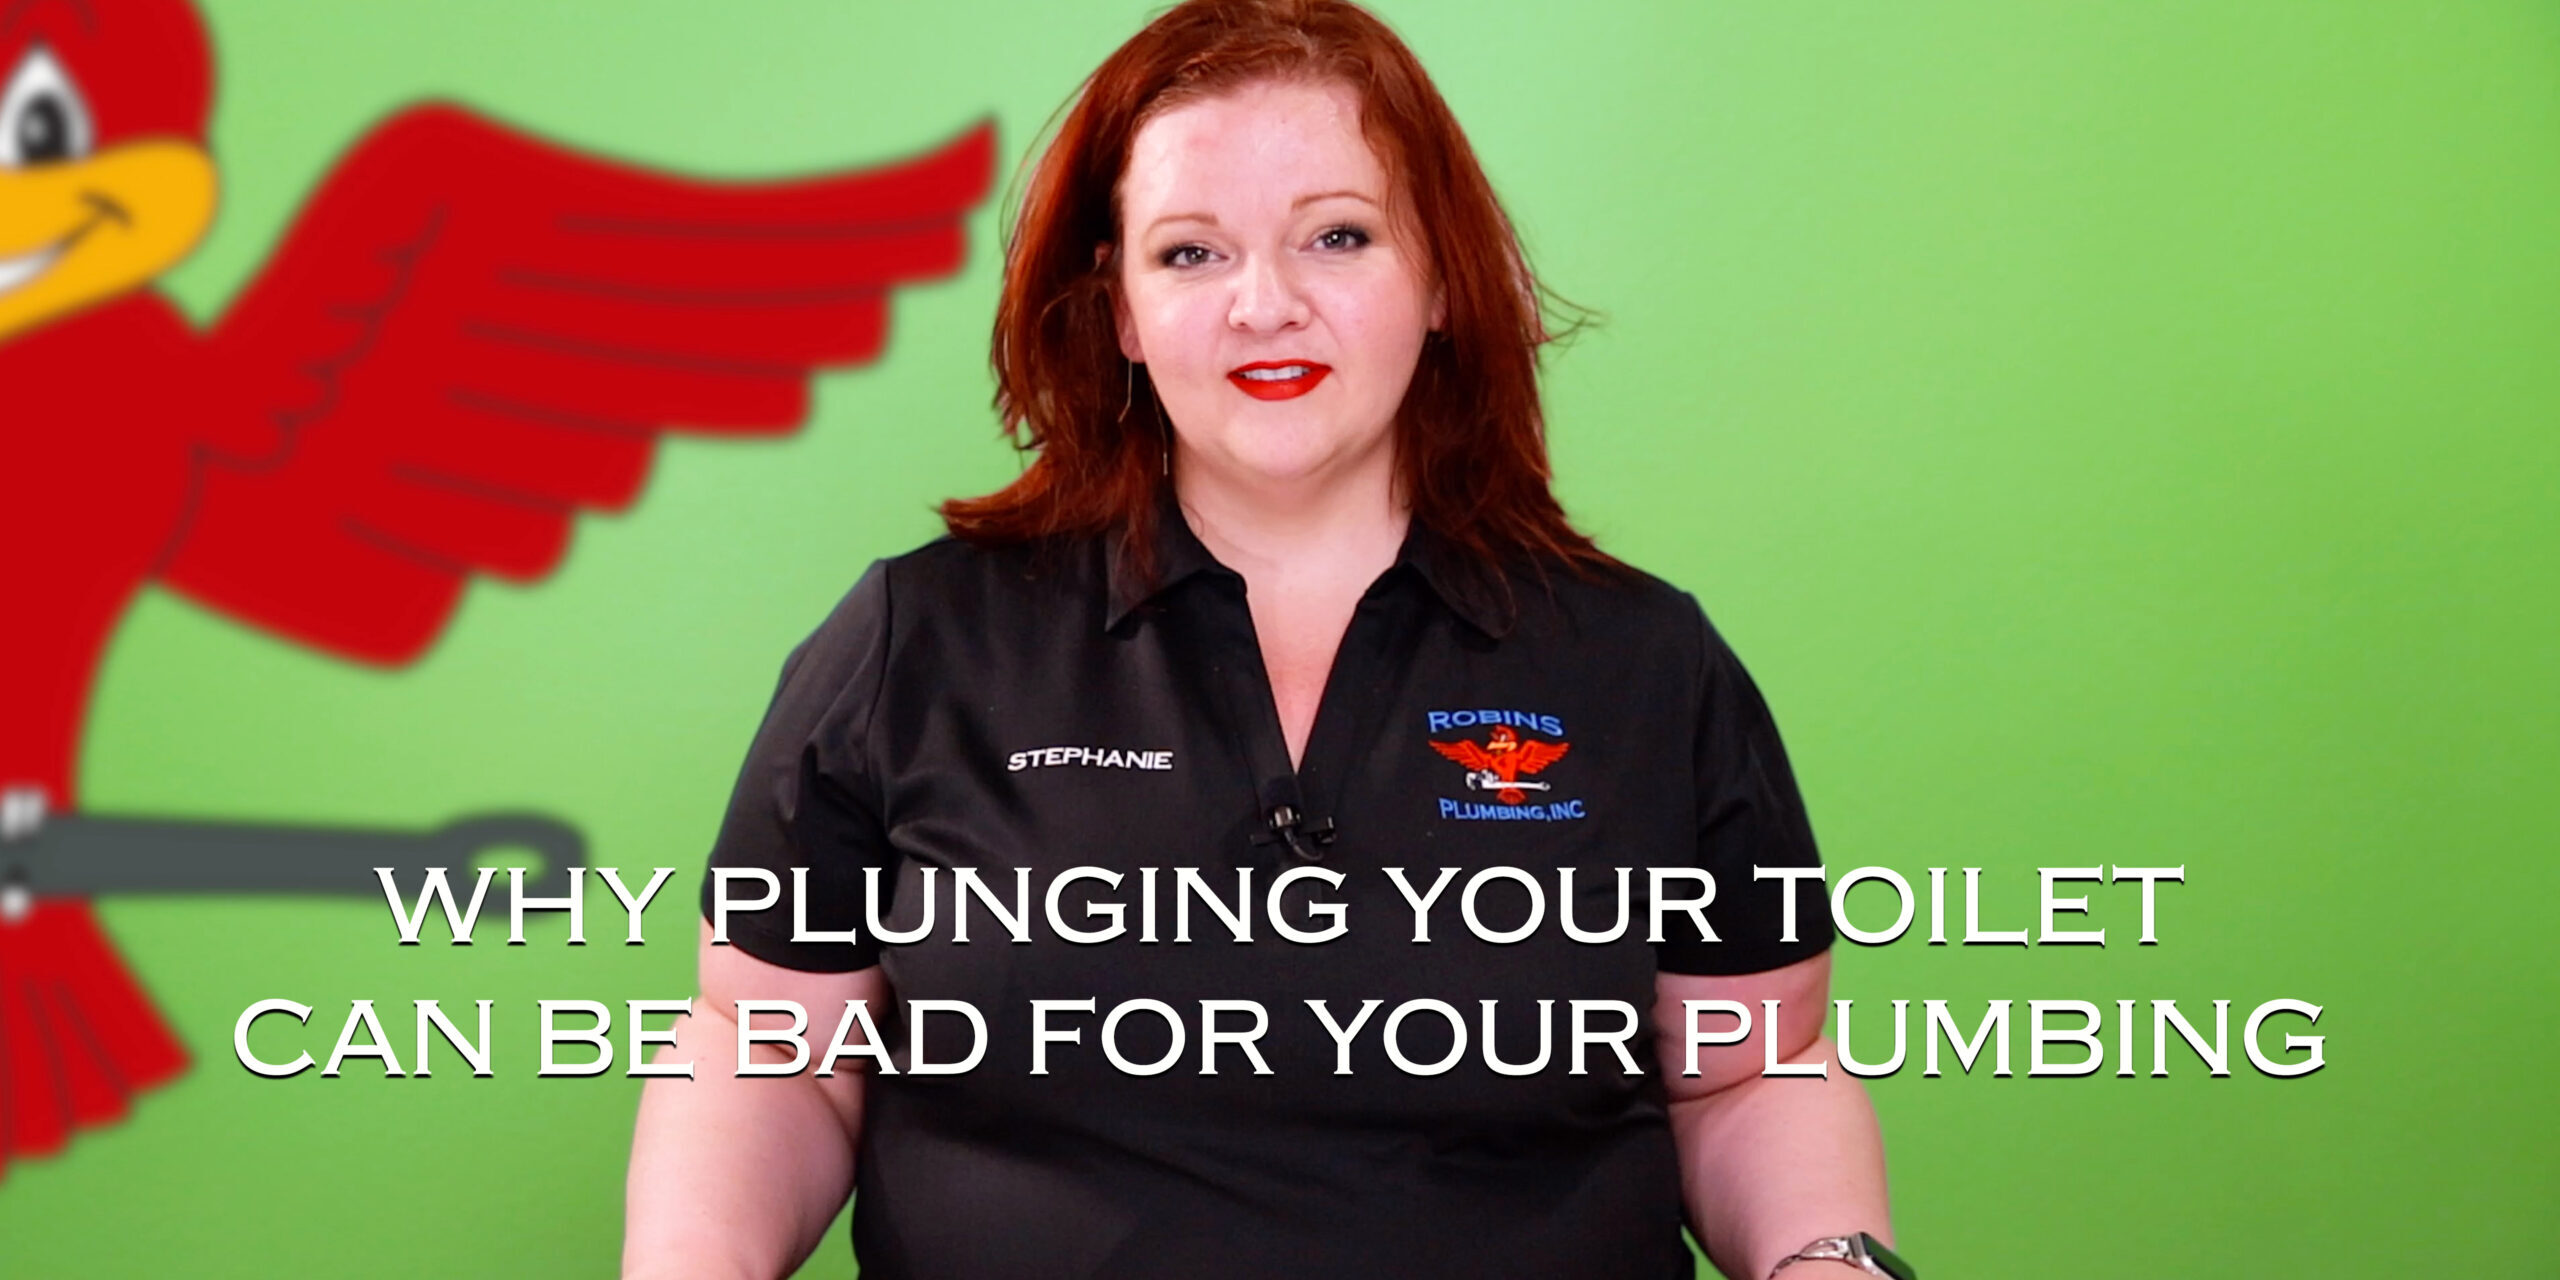 Owner of Robins Plumbing in Phoenix, AZ, Stephanie Robins featuring her blog titled 'Why Plunging Your Toilet Is Bad For Your Plumbing Scaled'